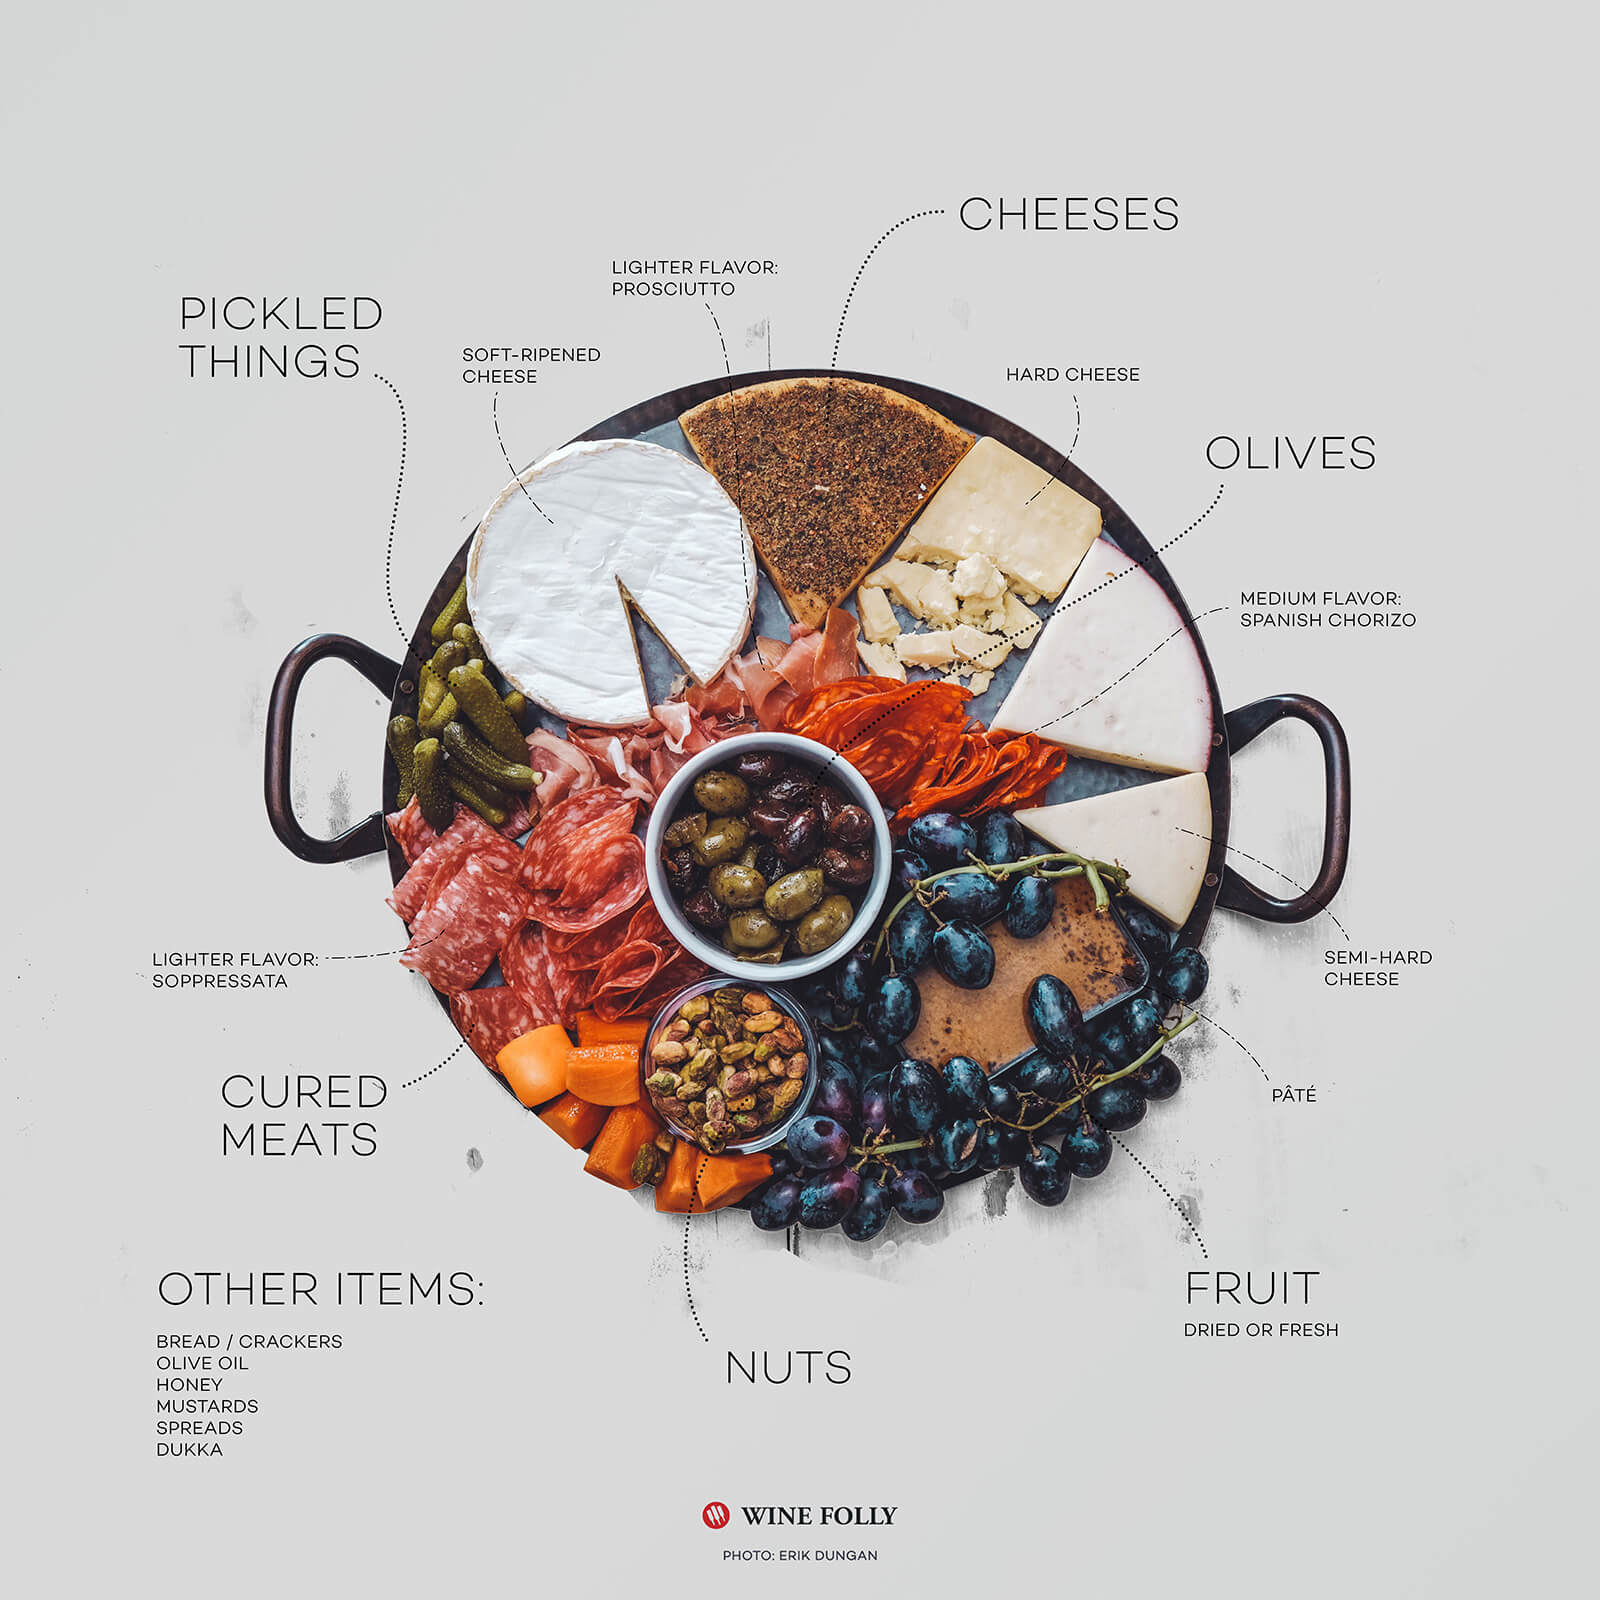 Anatomy of a charcuterie and cheese board. Original photo by Erik Dungan